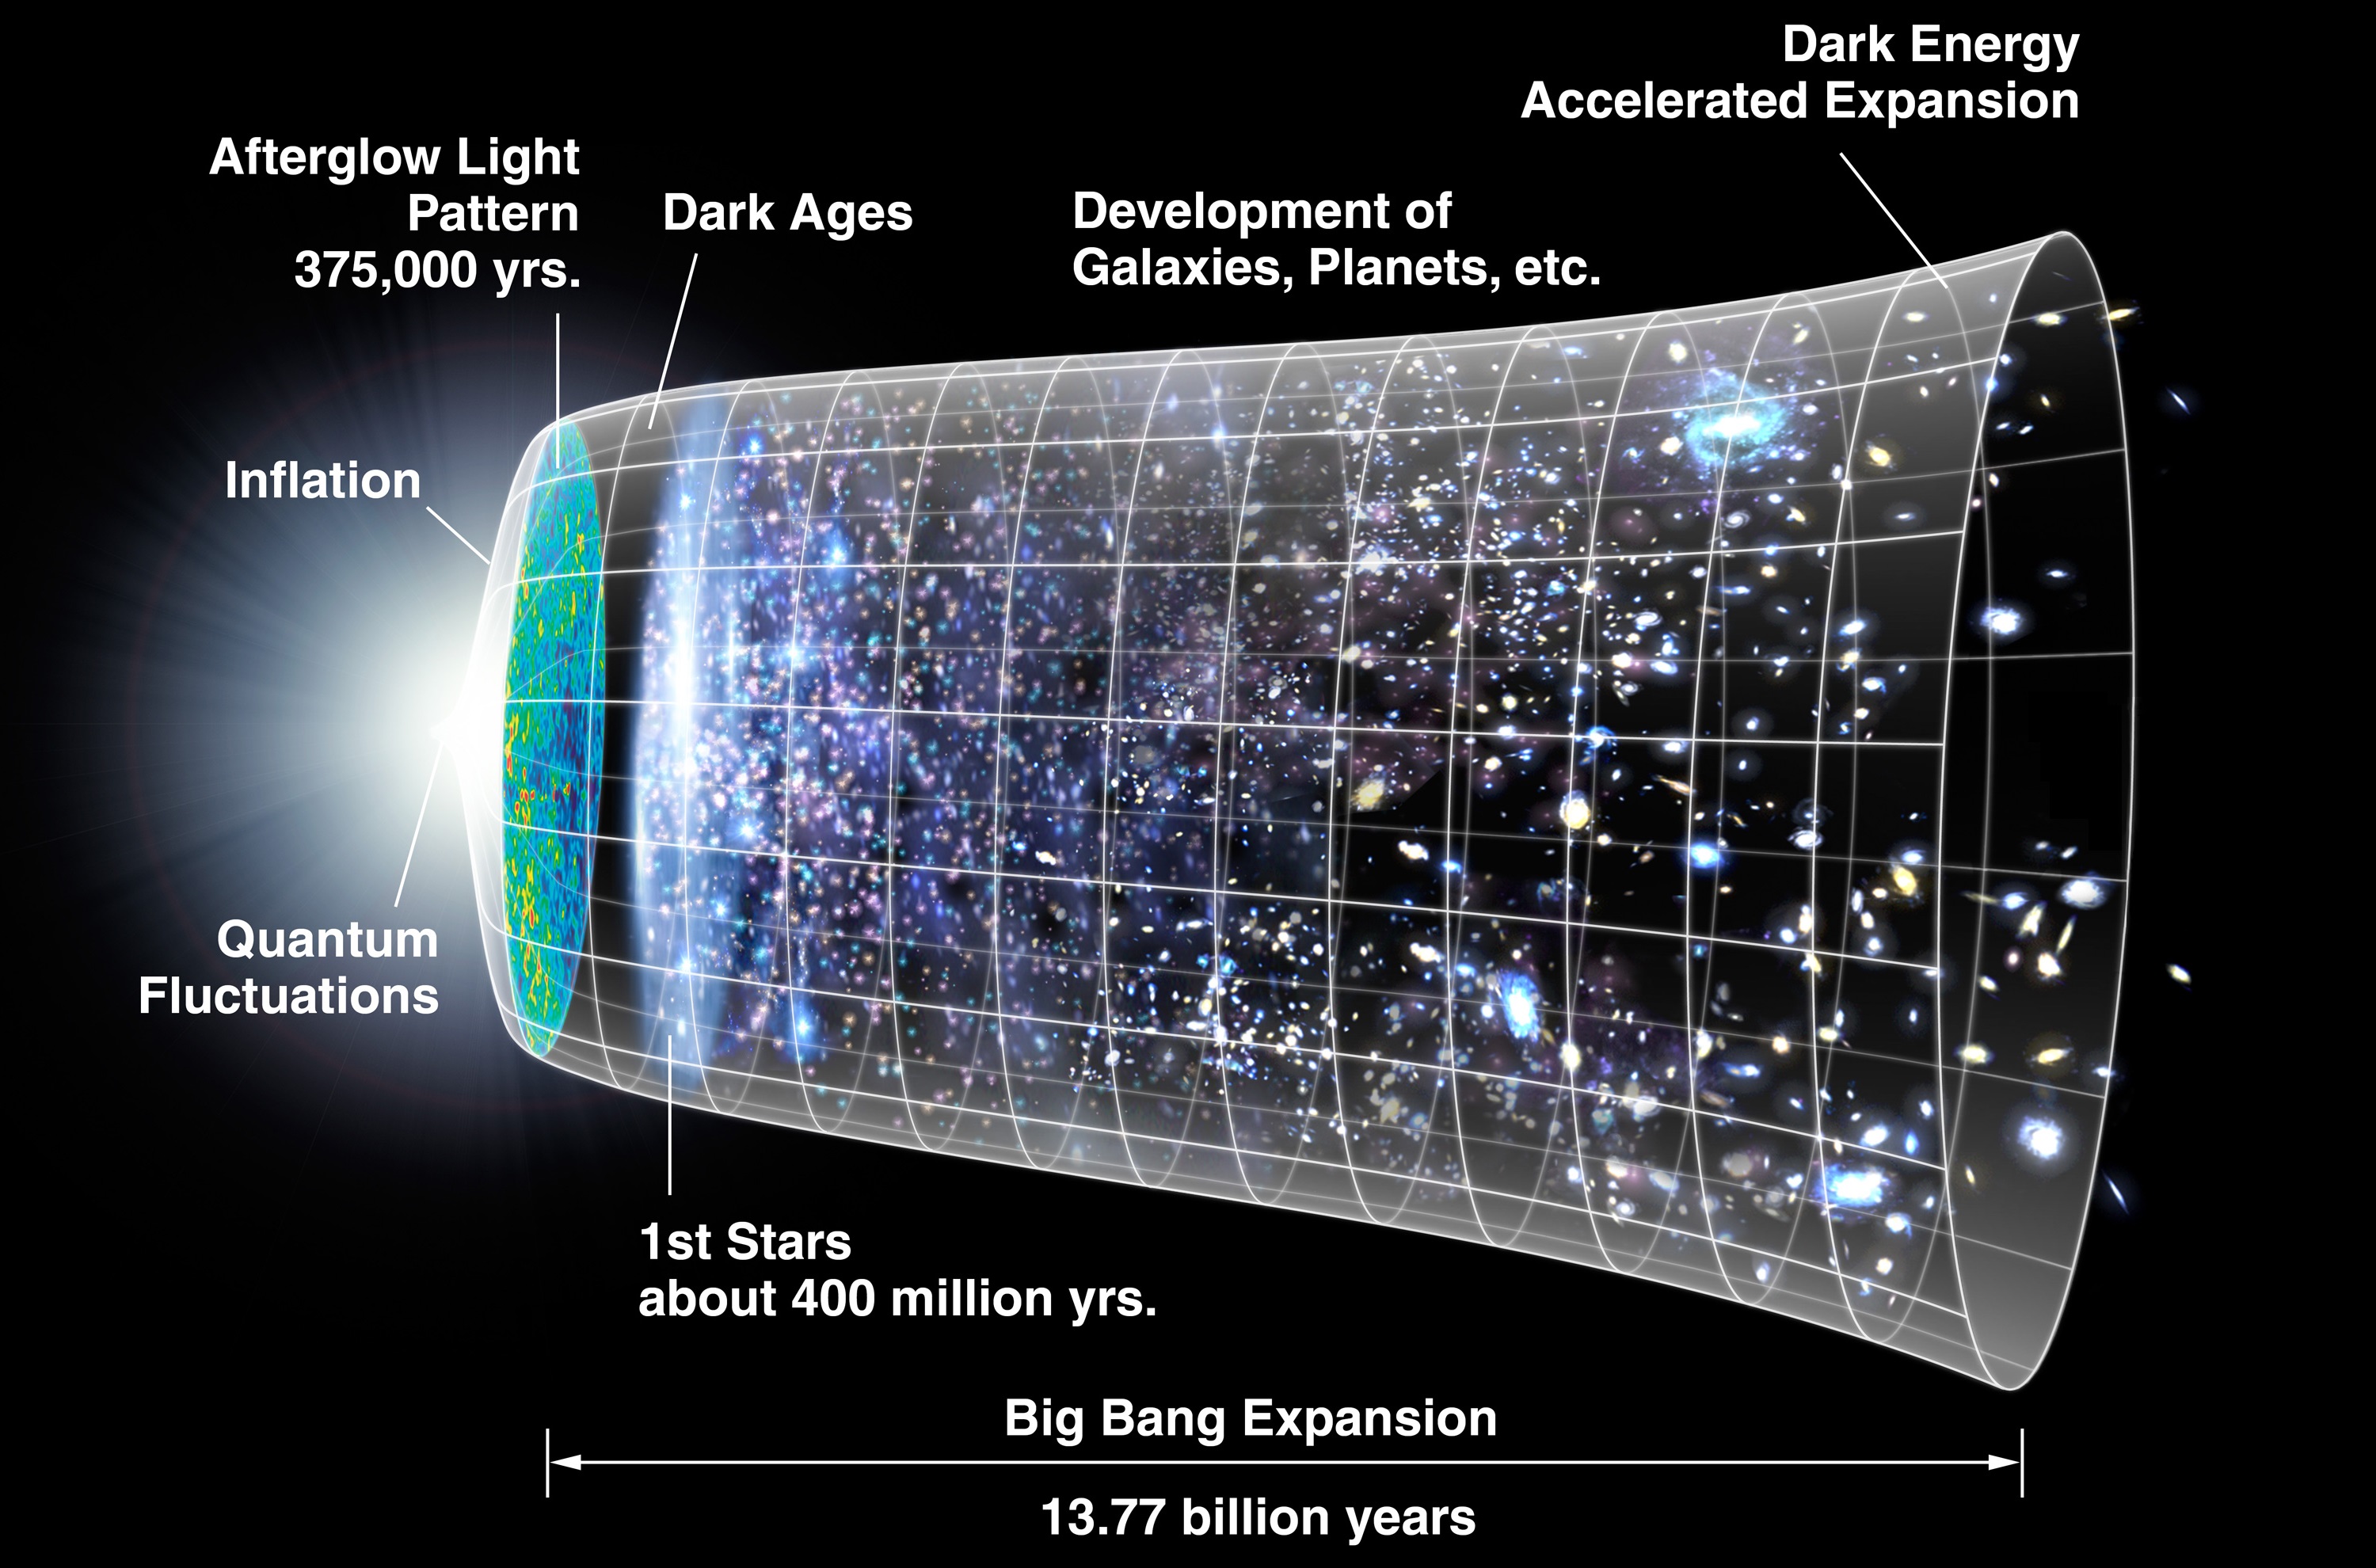 On a black field a cylinder outlined in a white grid expands from a bright white point on the left to a wide circle on the right. Held within this cylinder are the evolving contents of the universe. From left to right the stages of the universe are depicted and labeled: Inflation, the afterglow of the Big Bang, the Dark Ages, star formation, development of planets and galaxies.